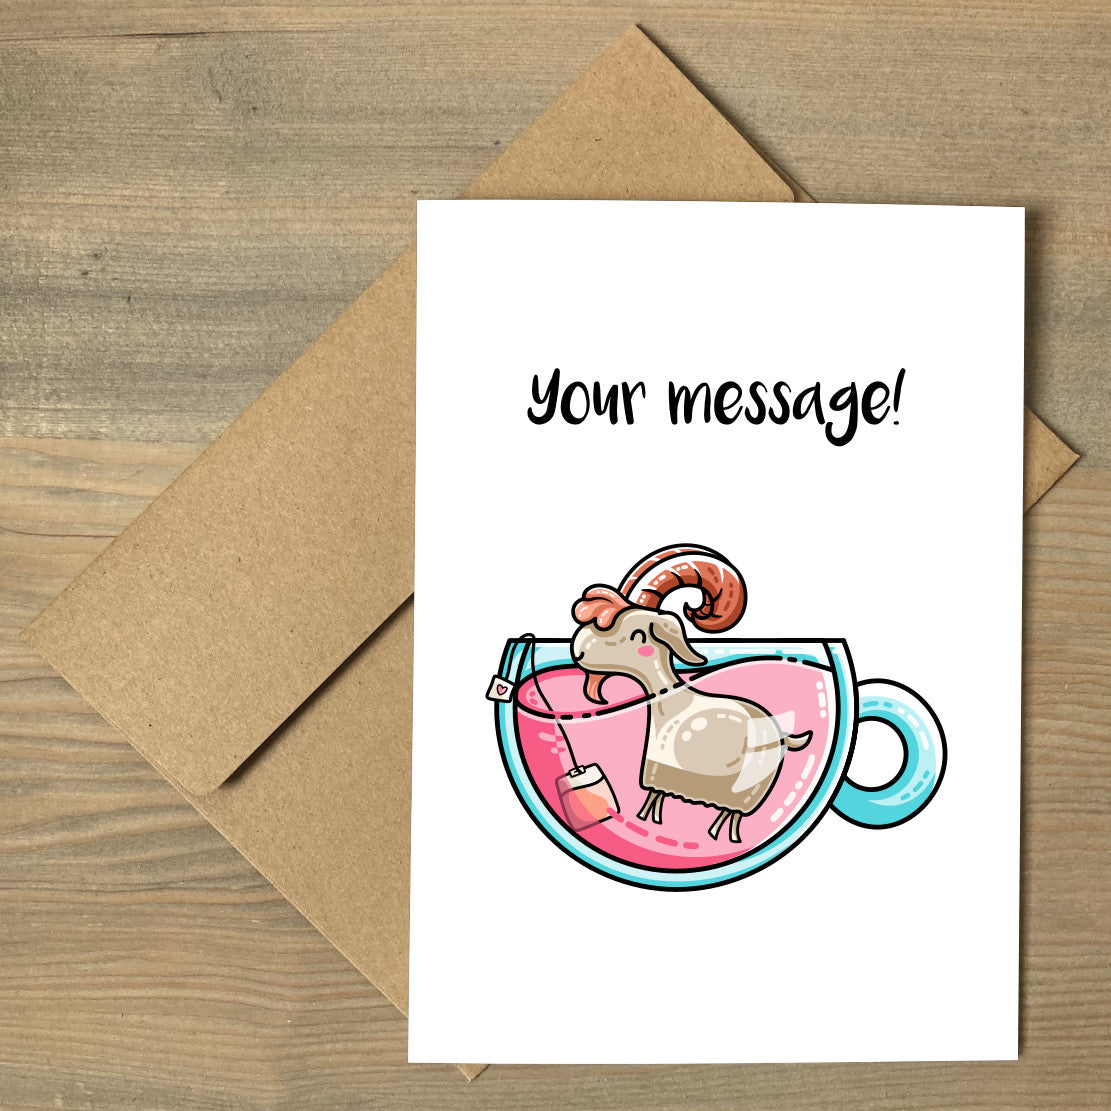 A white greeting card lying flat on a brown envelope, with a design of a cute goat in a teacup of pink liquid with personalised wording above